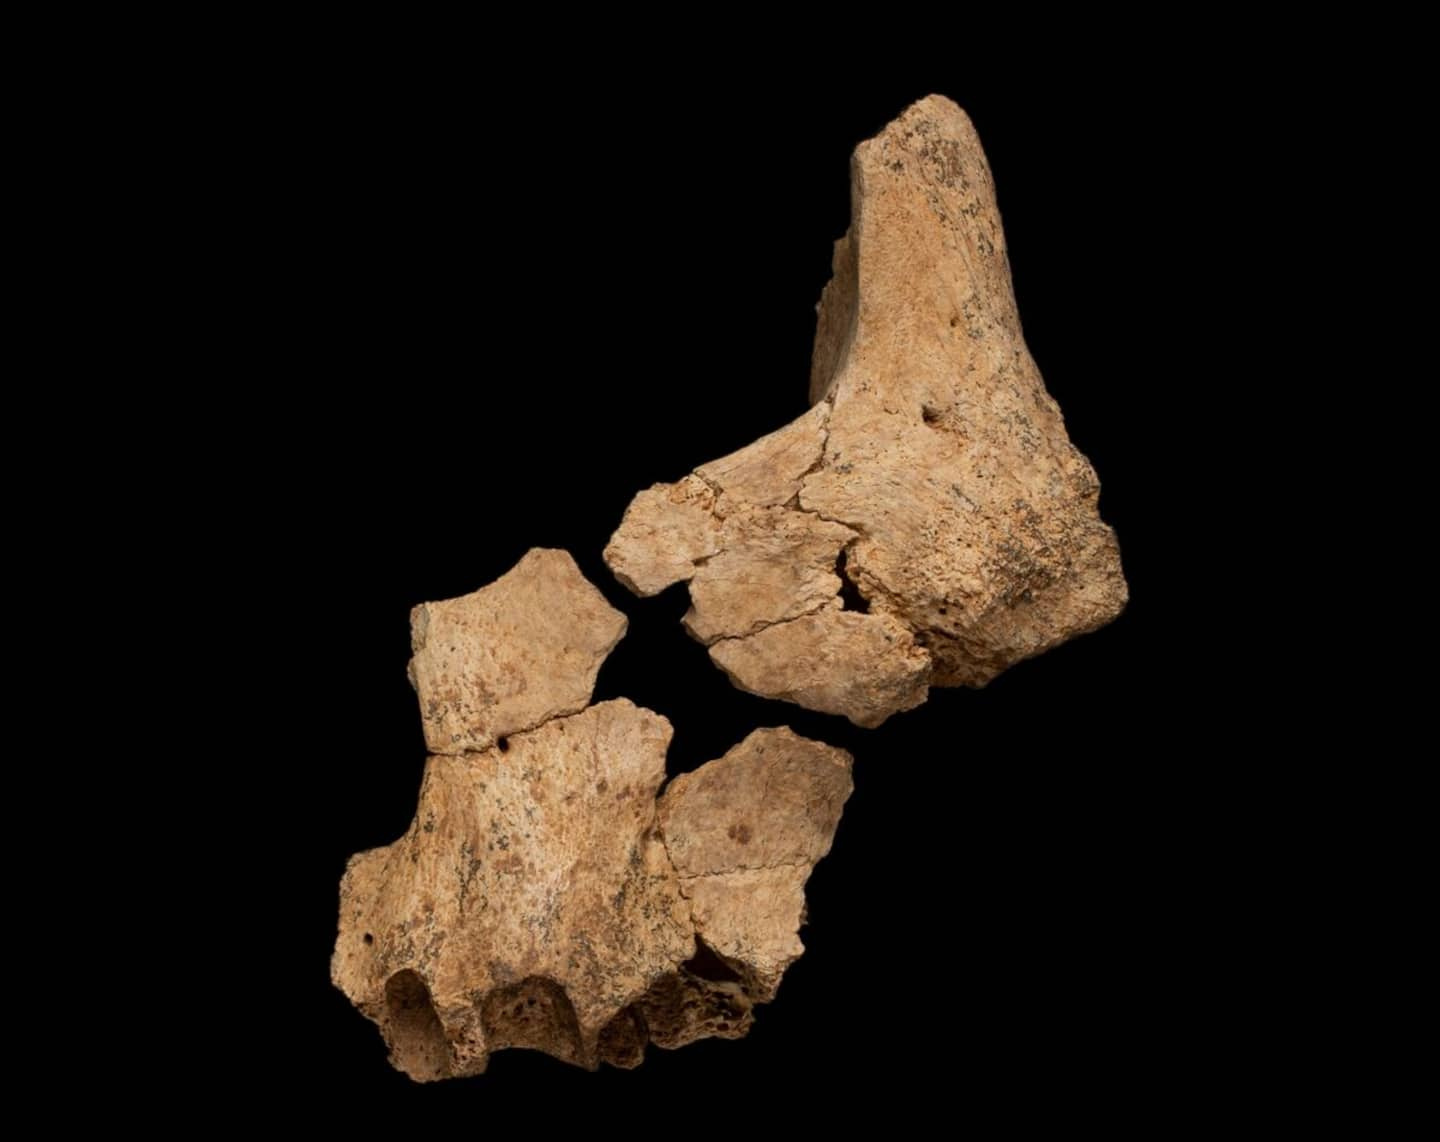 Possibly Europe's Oldest Human Fossil Discovered in Spain